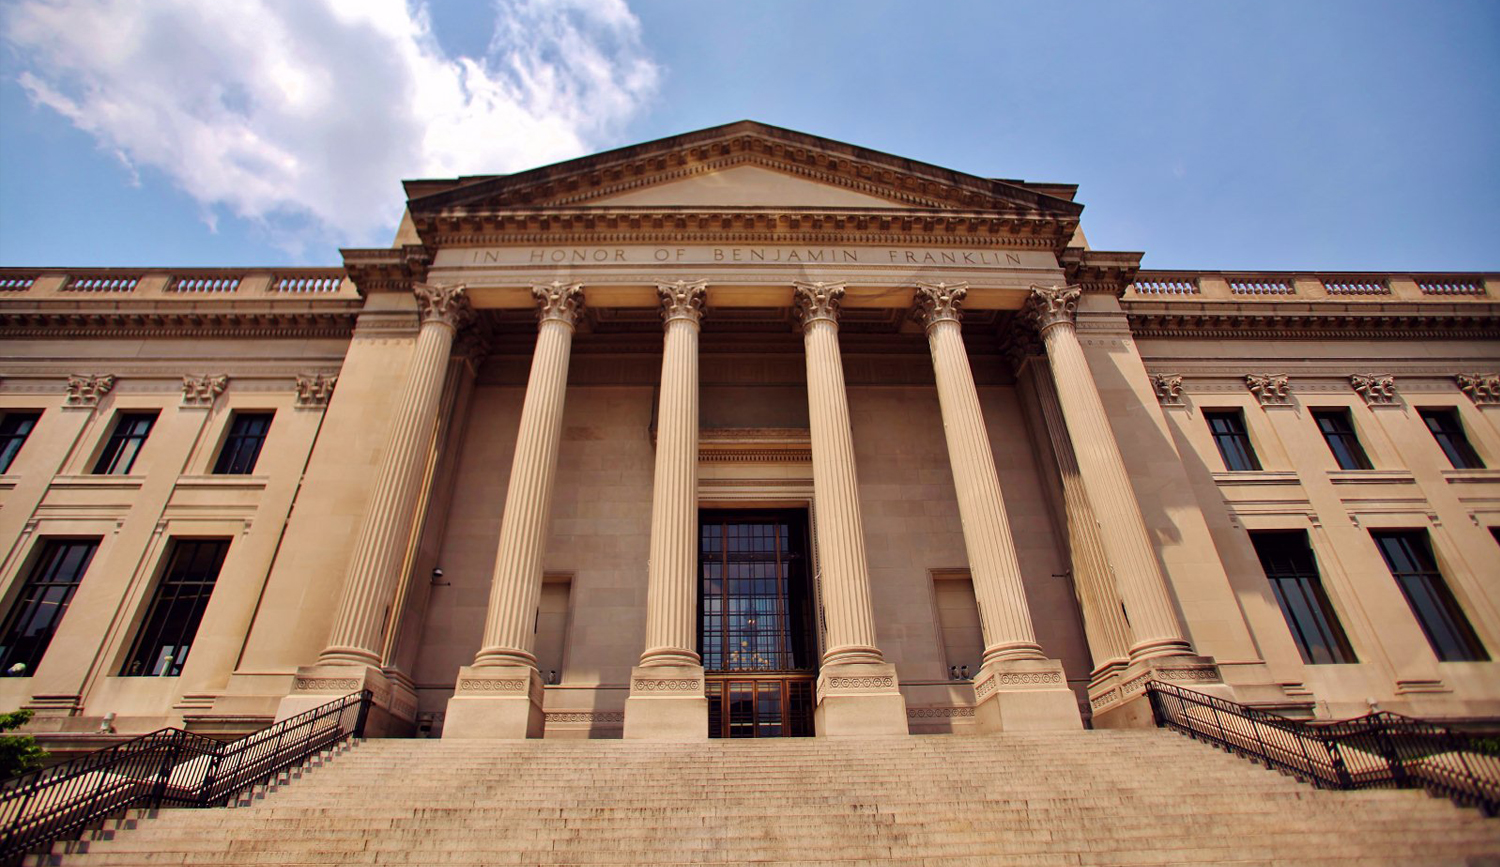 The Franklin Institute Building from outside